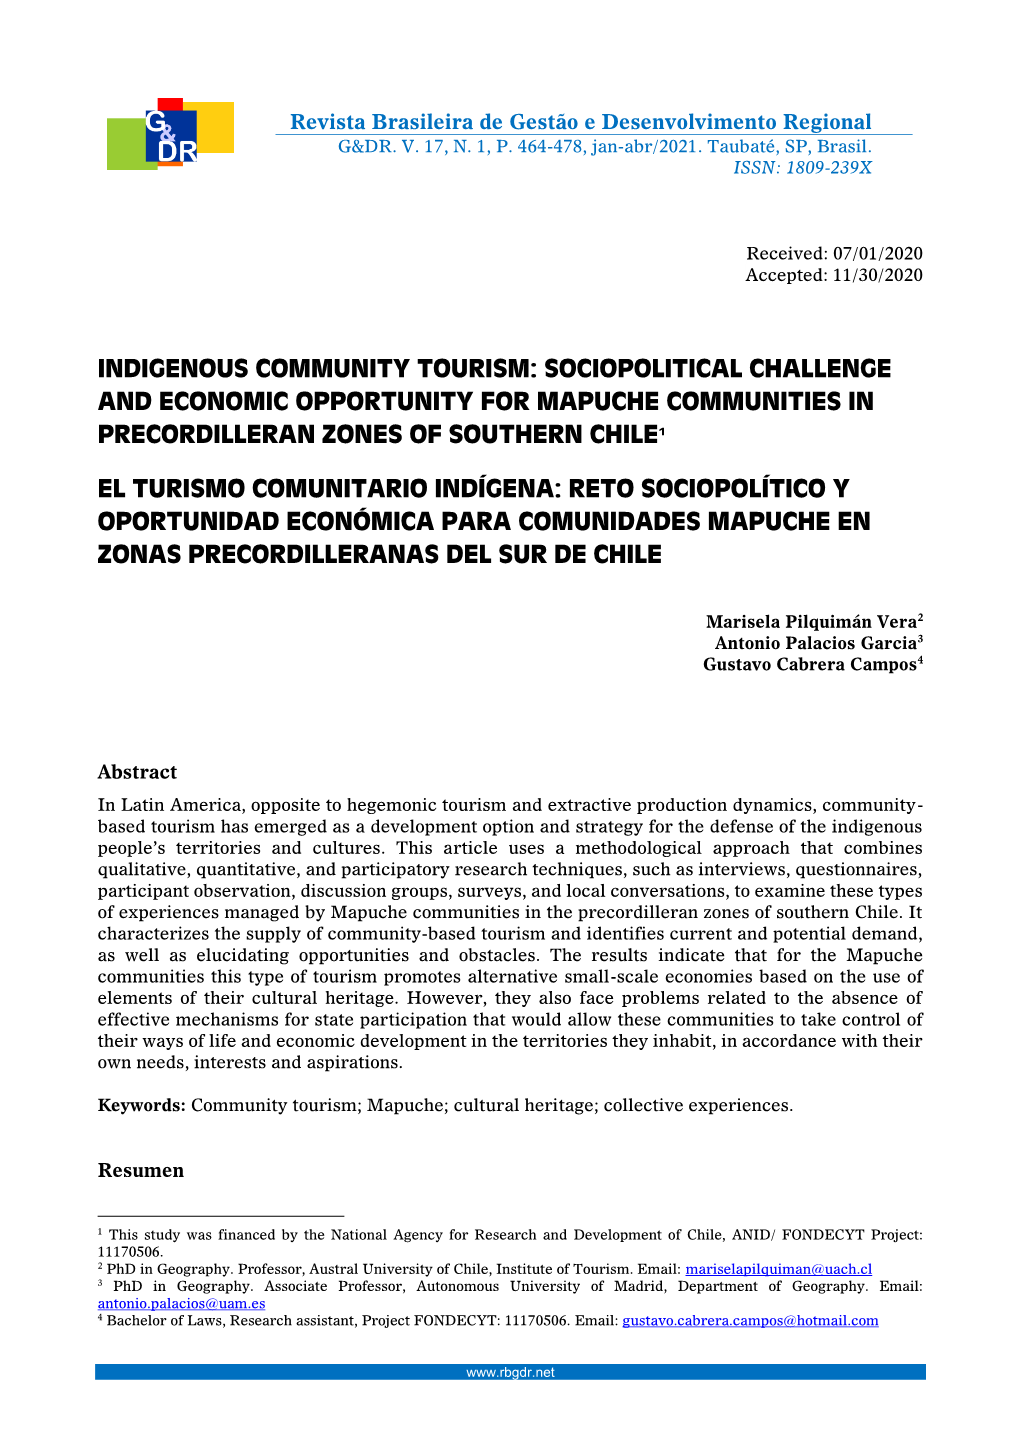 Indigenous Community Tourism: Sociopolitical Challenge and Economic Opportunity for Mapuche Communities in Precordilleran Zones of Southern Chile1